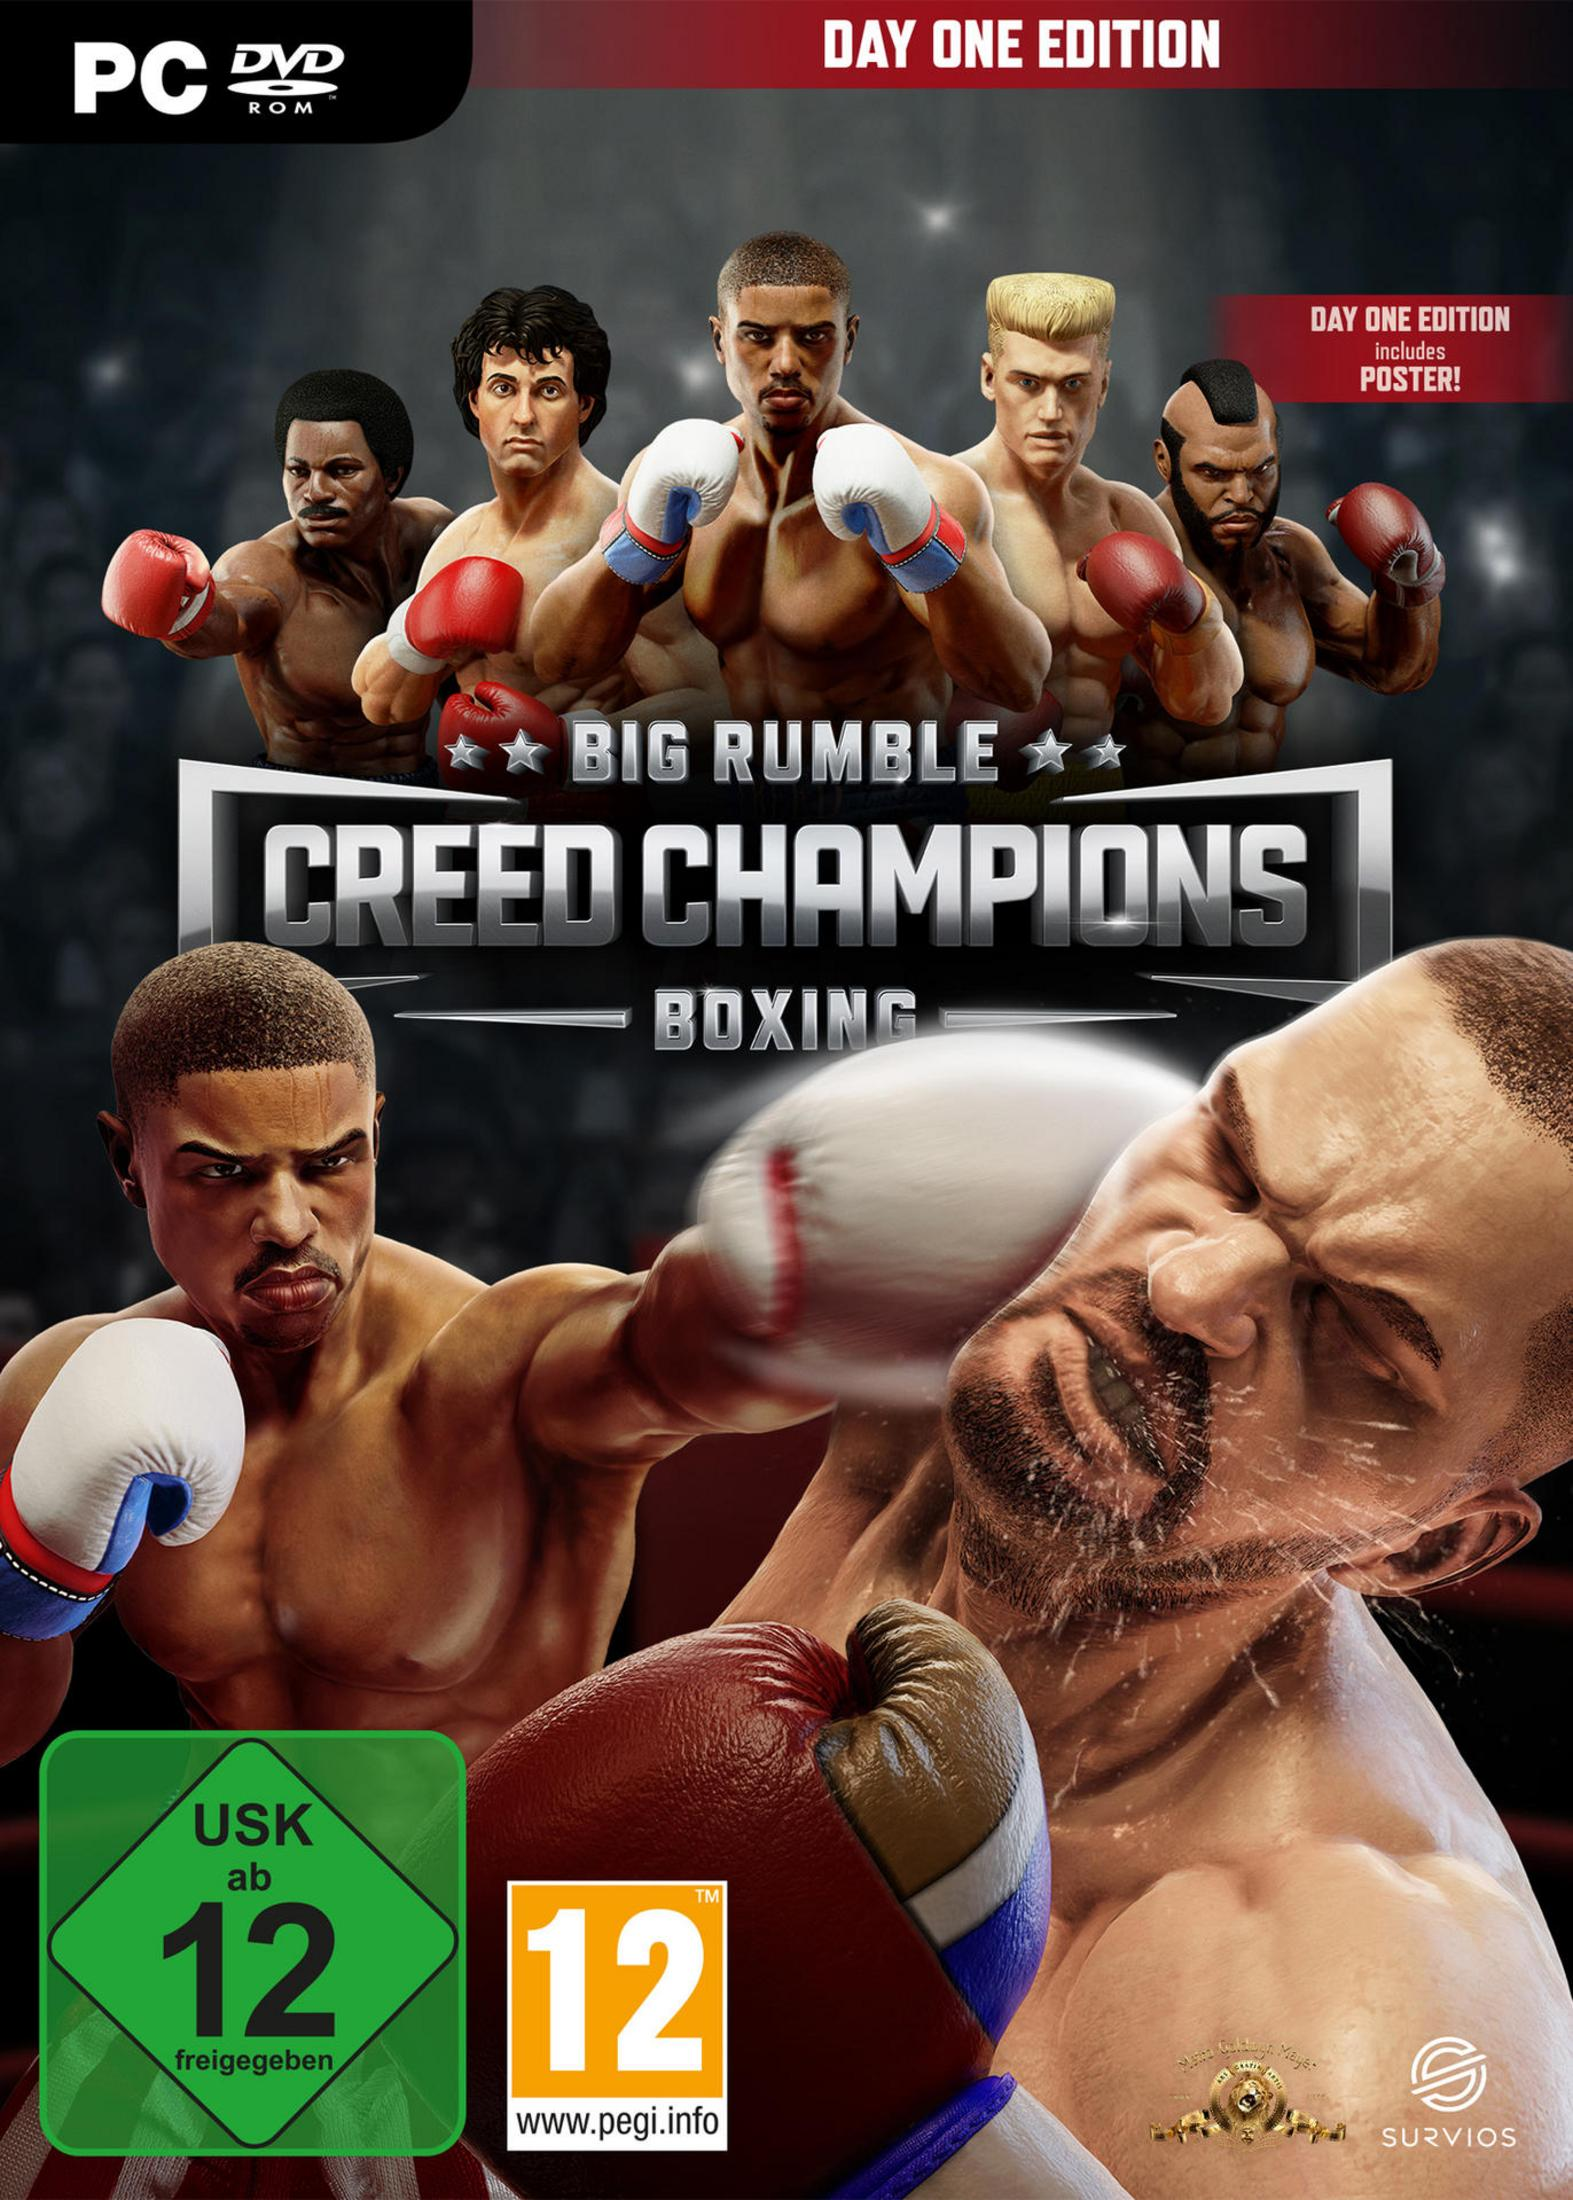 ONE CHAMPIONSDAY BIG ED. [PC] RUMBLE - BOXING-CREED